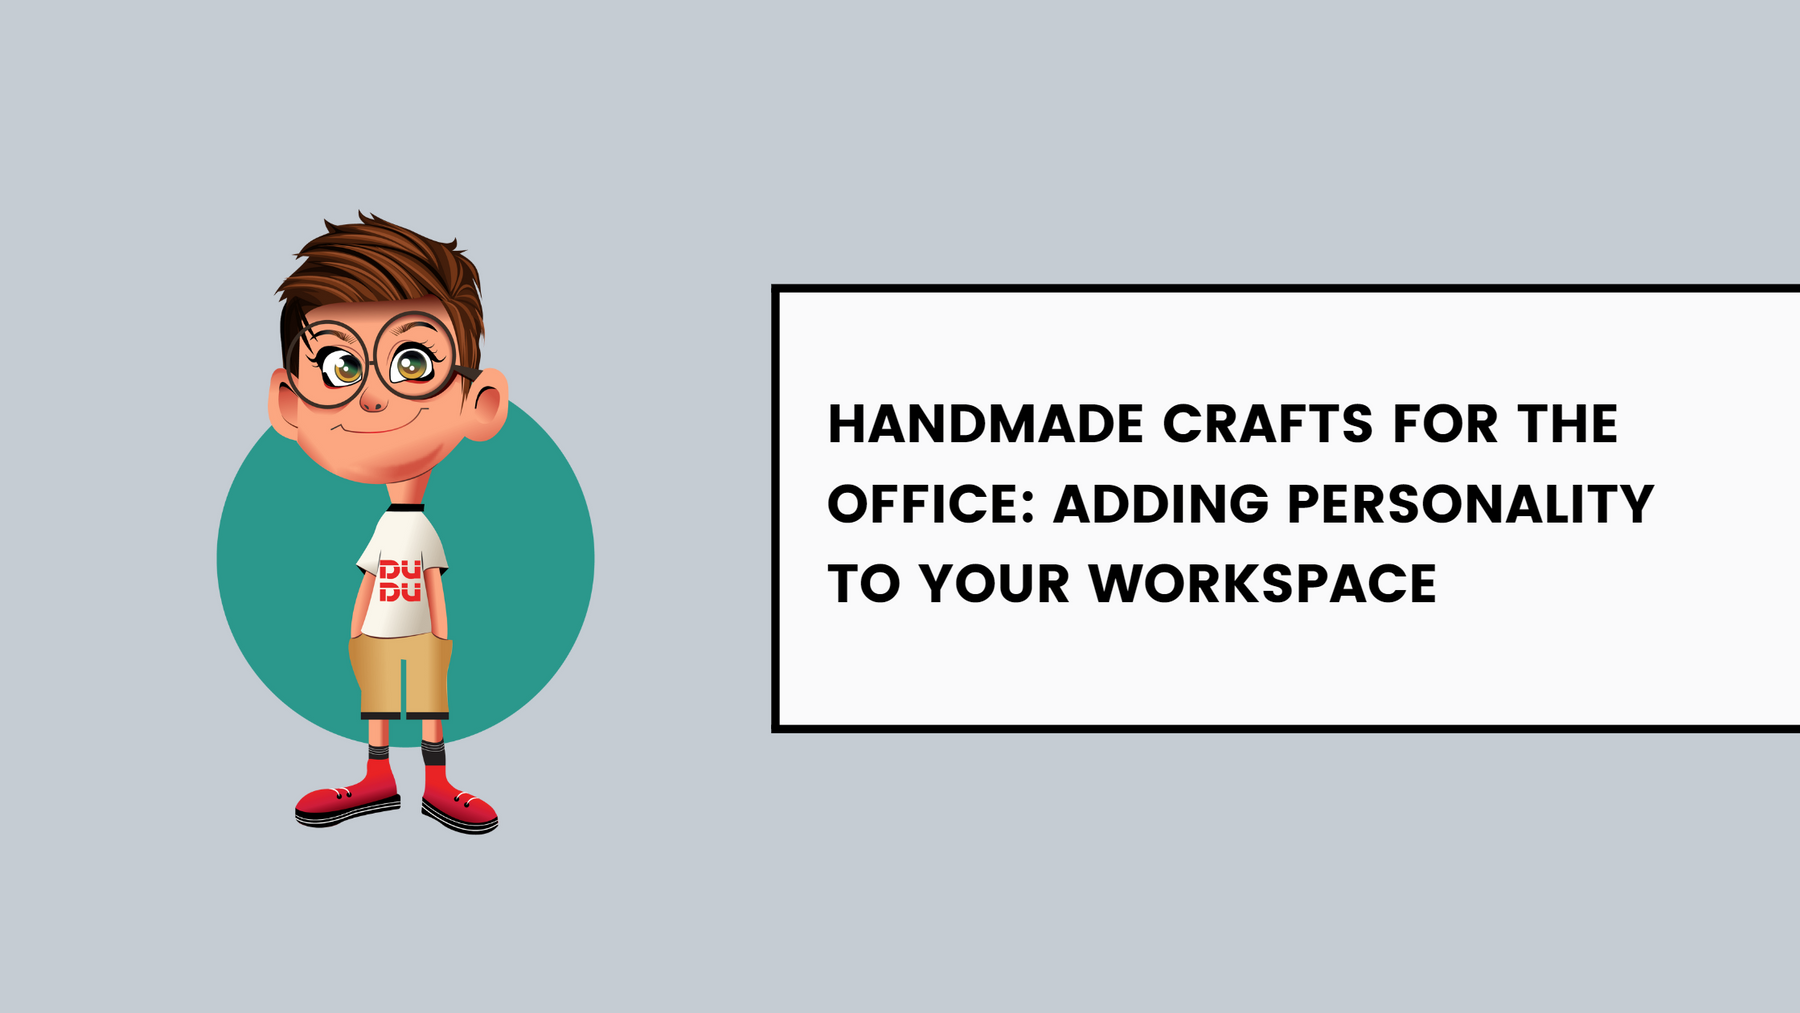 Handmade Crafts For The Office: Adding Personality To Your Workspace